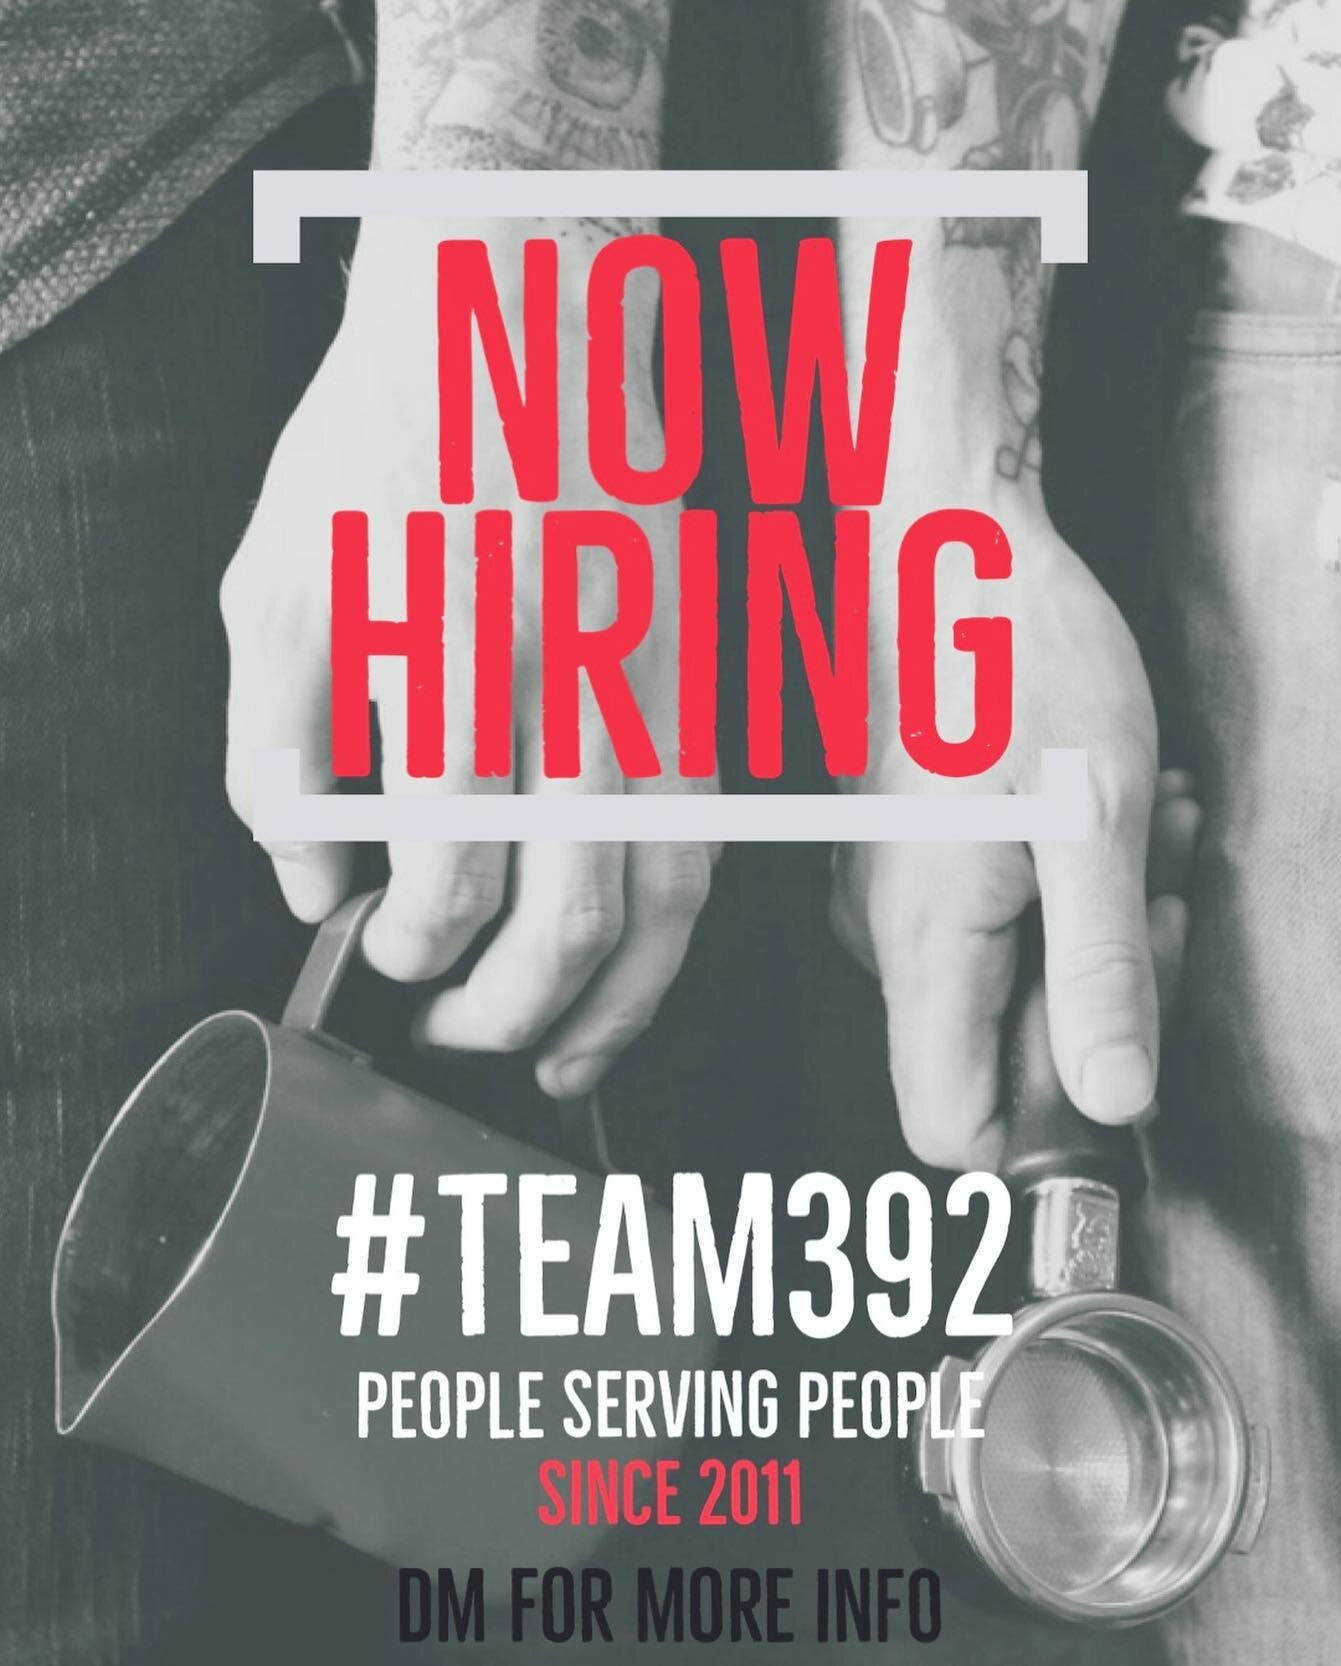 Calling All Hospitality Superstars! We Need Your WINNING Personalities on #Team392! 
.
.
#NowHiring All Positions. #Barista #Hospitality #Kitchen #Production #DeliveryDriver #Baker 
.
.
#DrinkBetterCoffee #EatBetterFood #BeBetterPeople #392Caffe #Exp